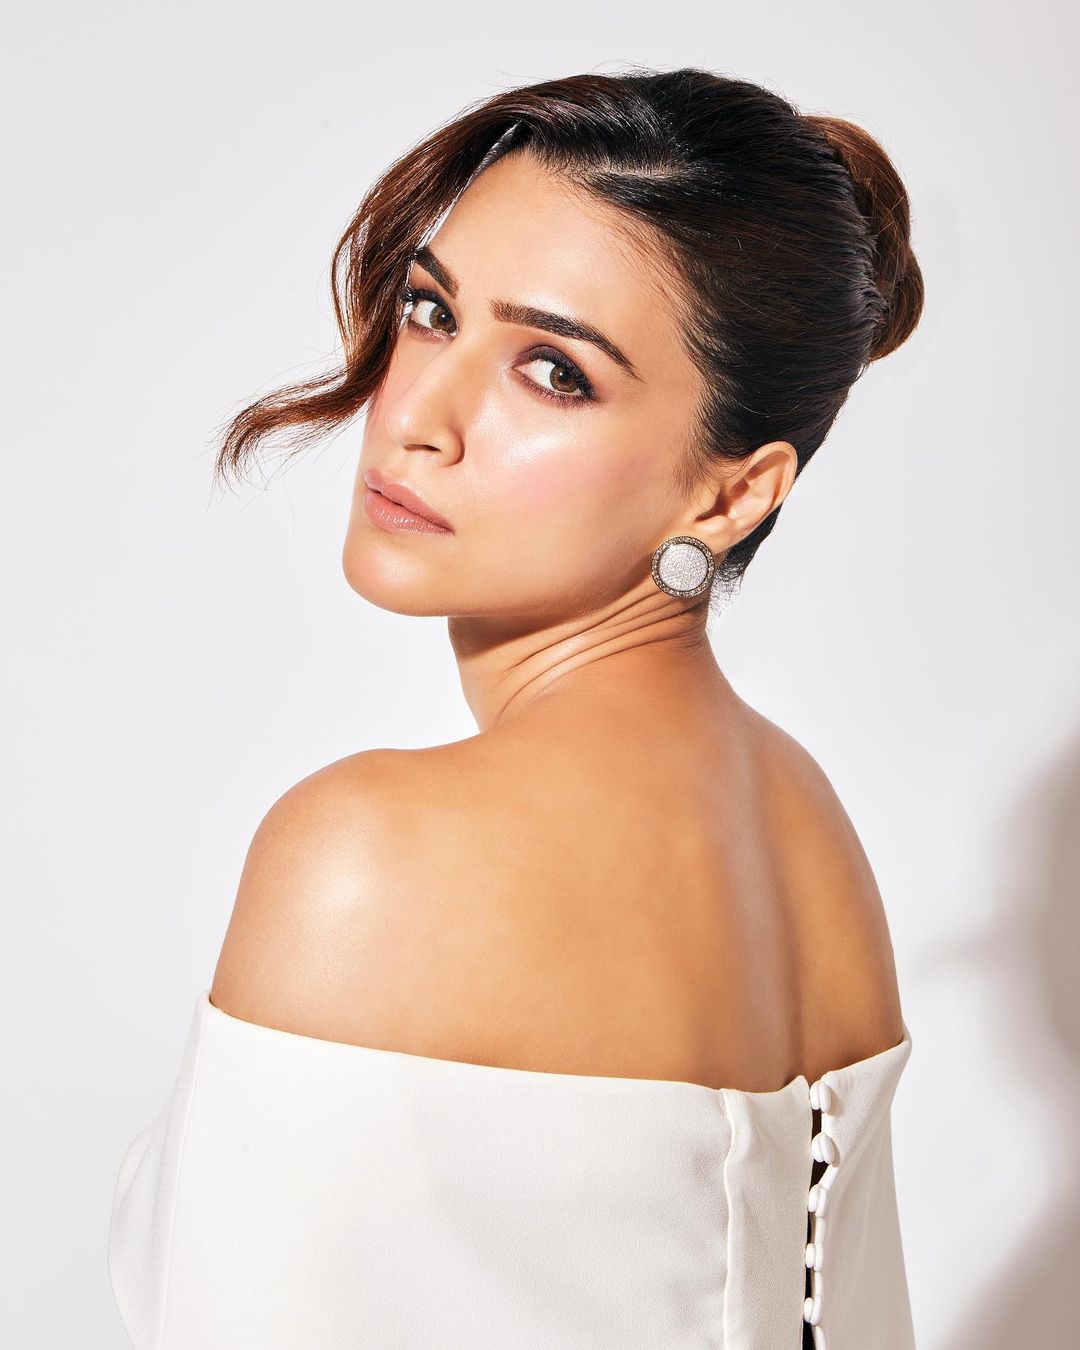 Kriti Sanon Displays Toned Figure In Black Backless Dress With Plunging Neckline See Her Drop